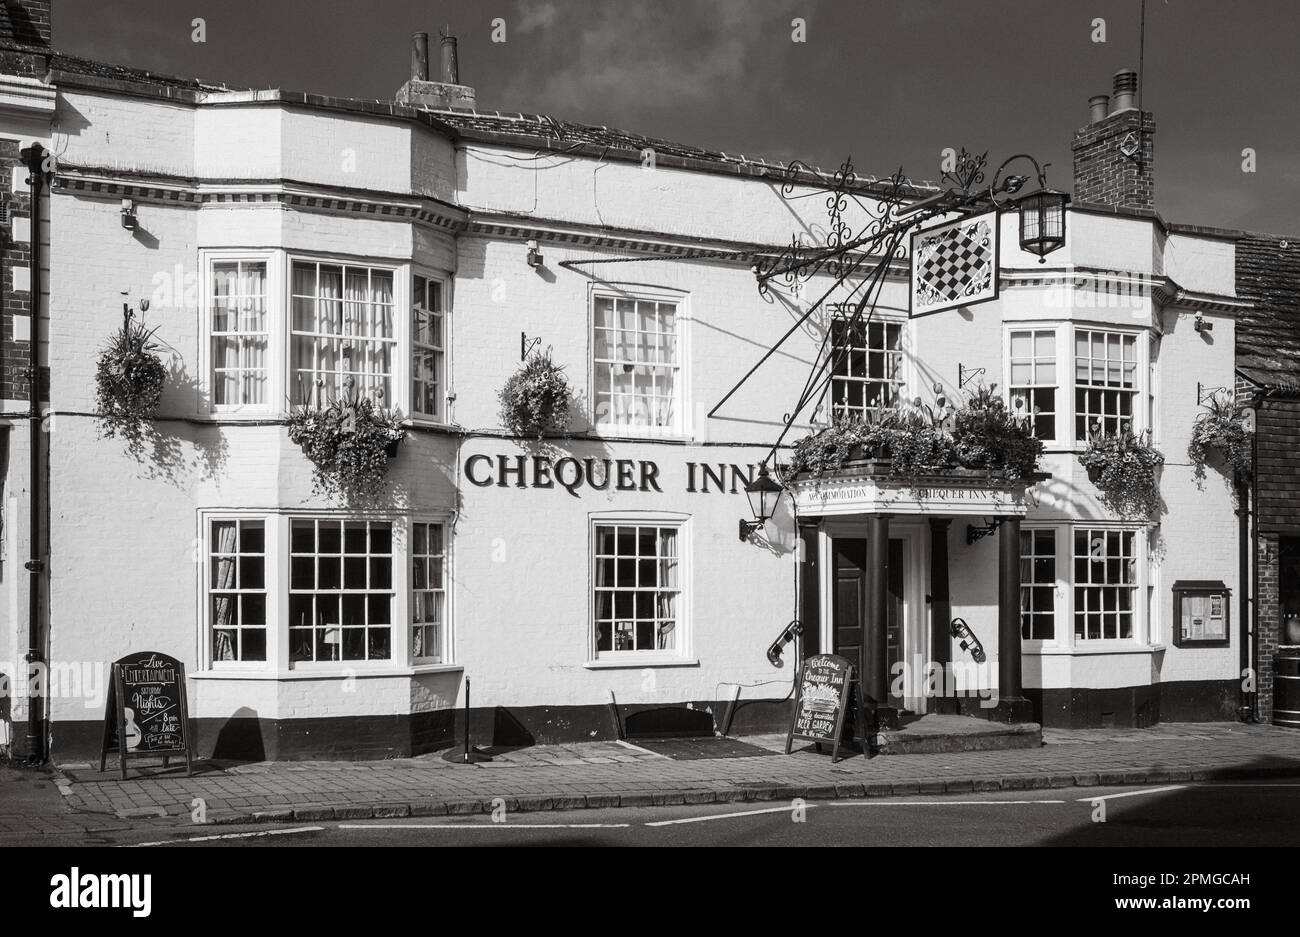 The 15th century Chequer Inn, a traditional pub in Steyning, West Sussex, UK. Stock Photo